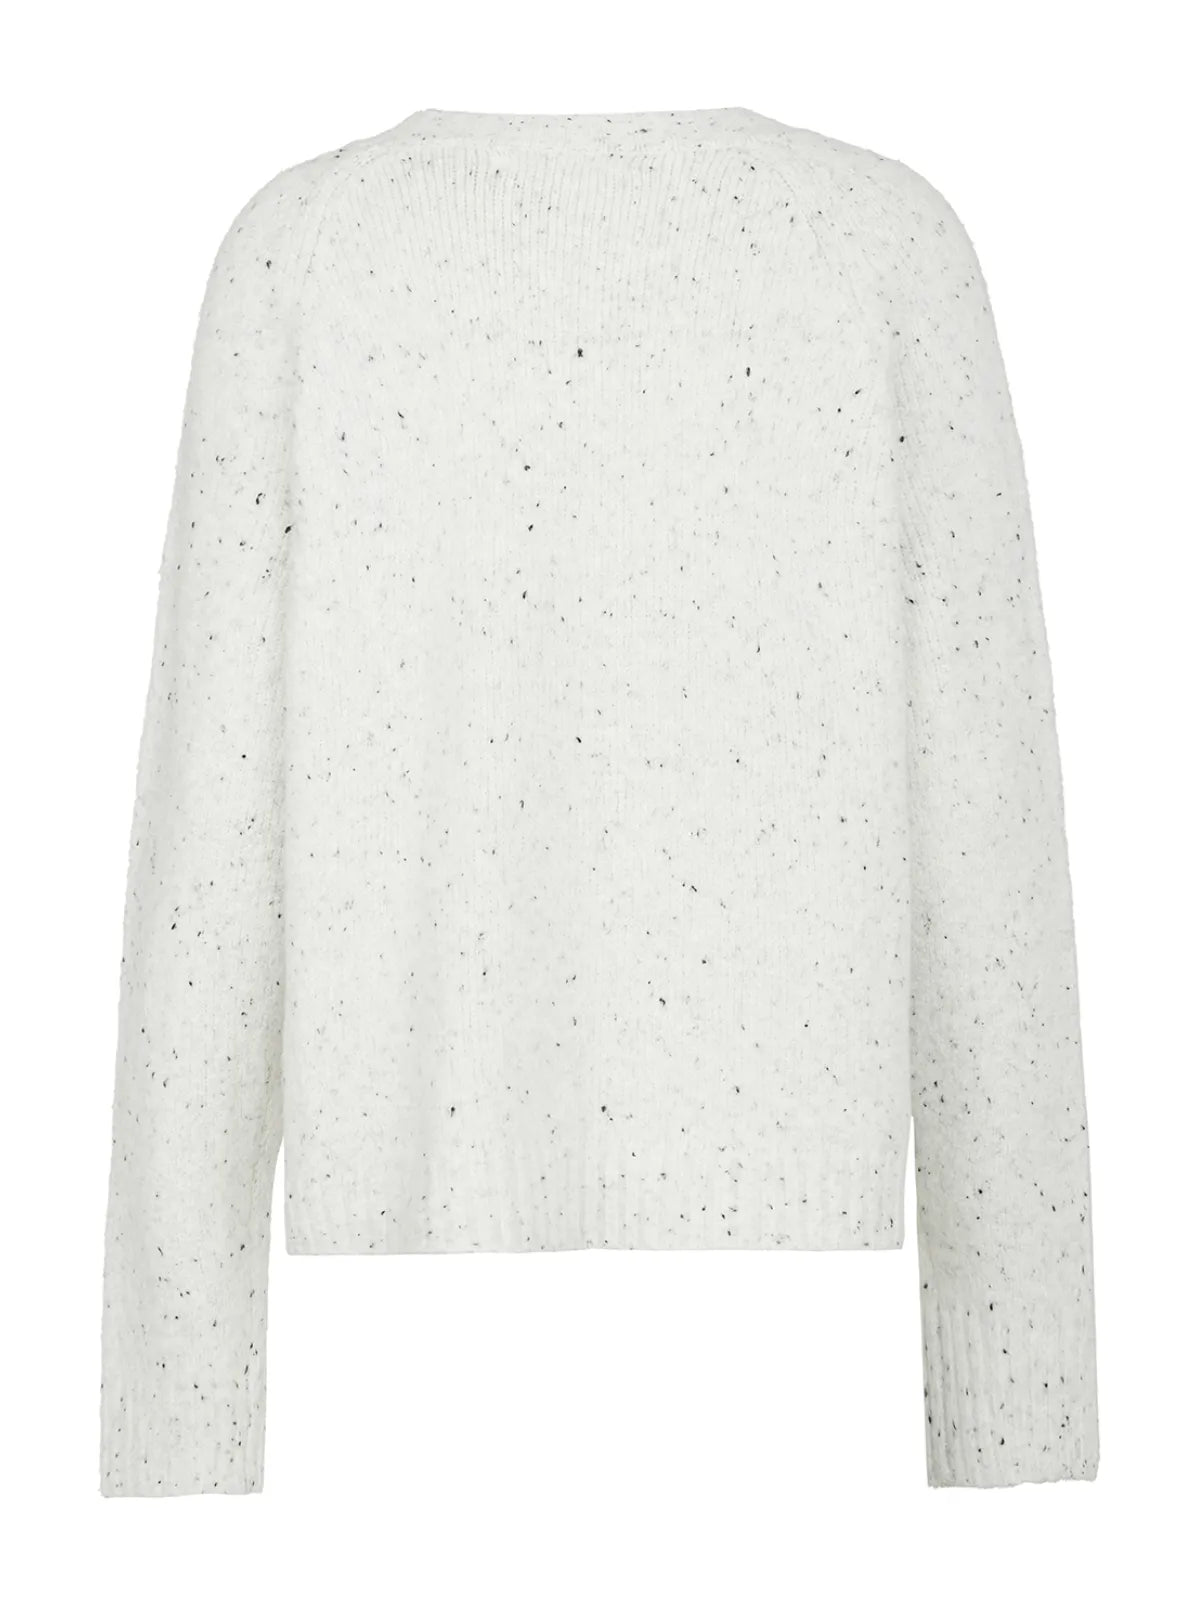  Achieve classic elegance with this fresh white crewneck sweater, enhanced by black polka dot accents, offering a timeless and sophisticated style.